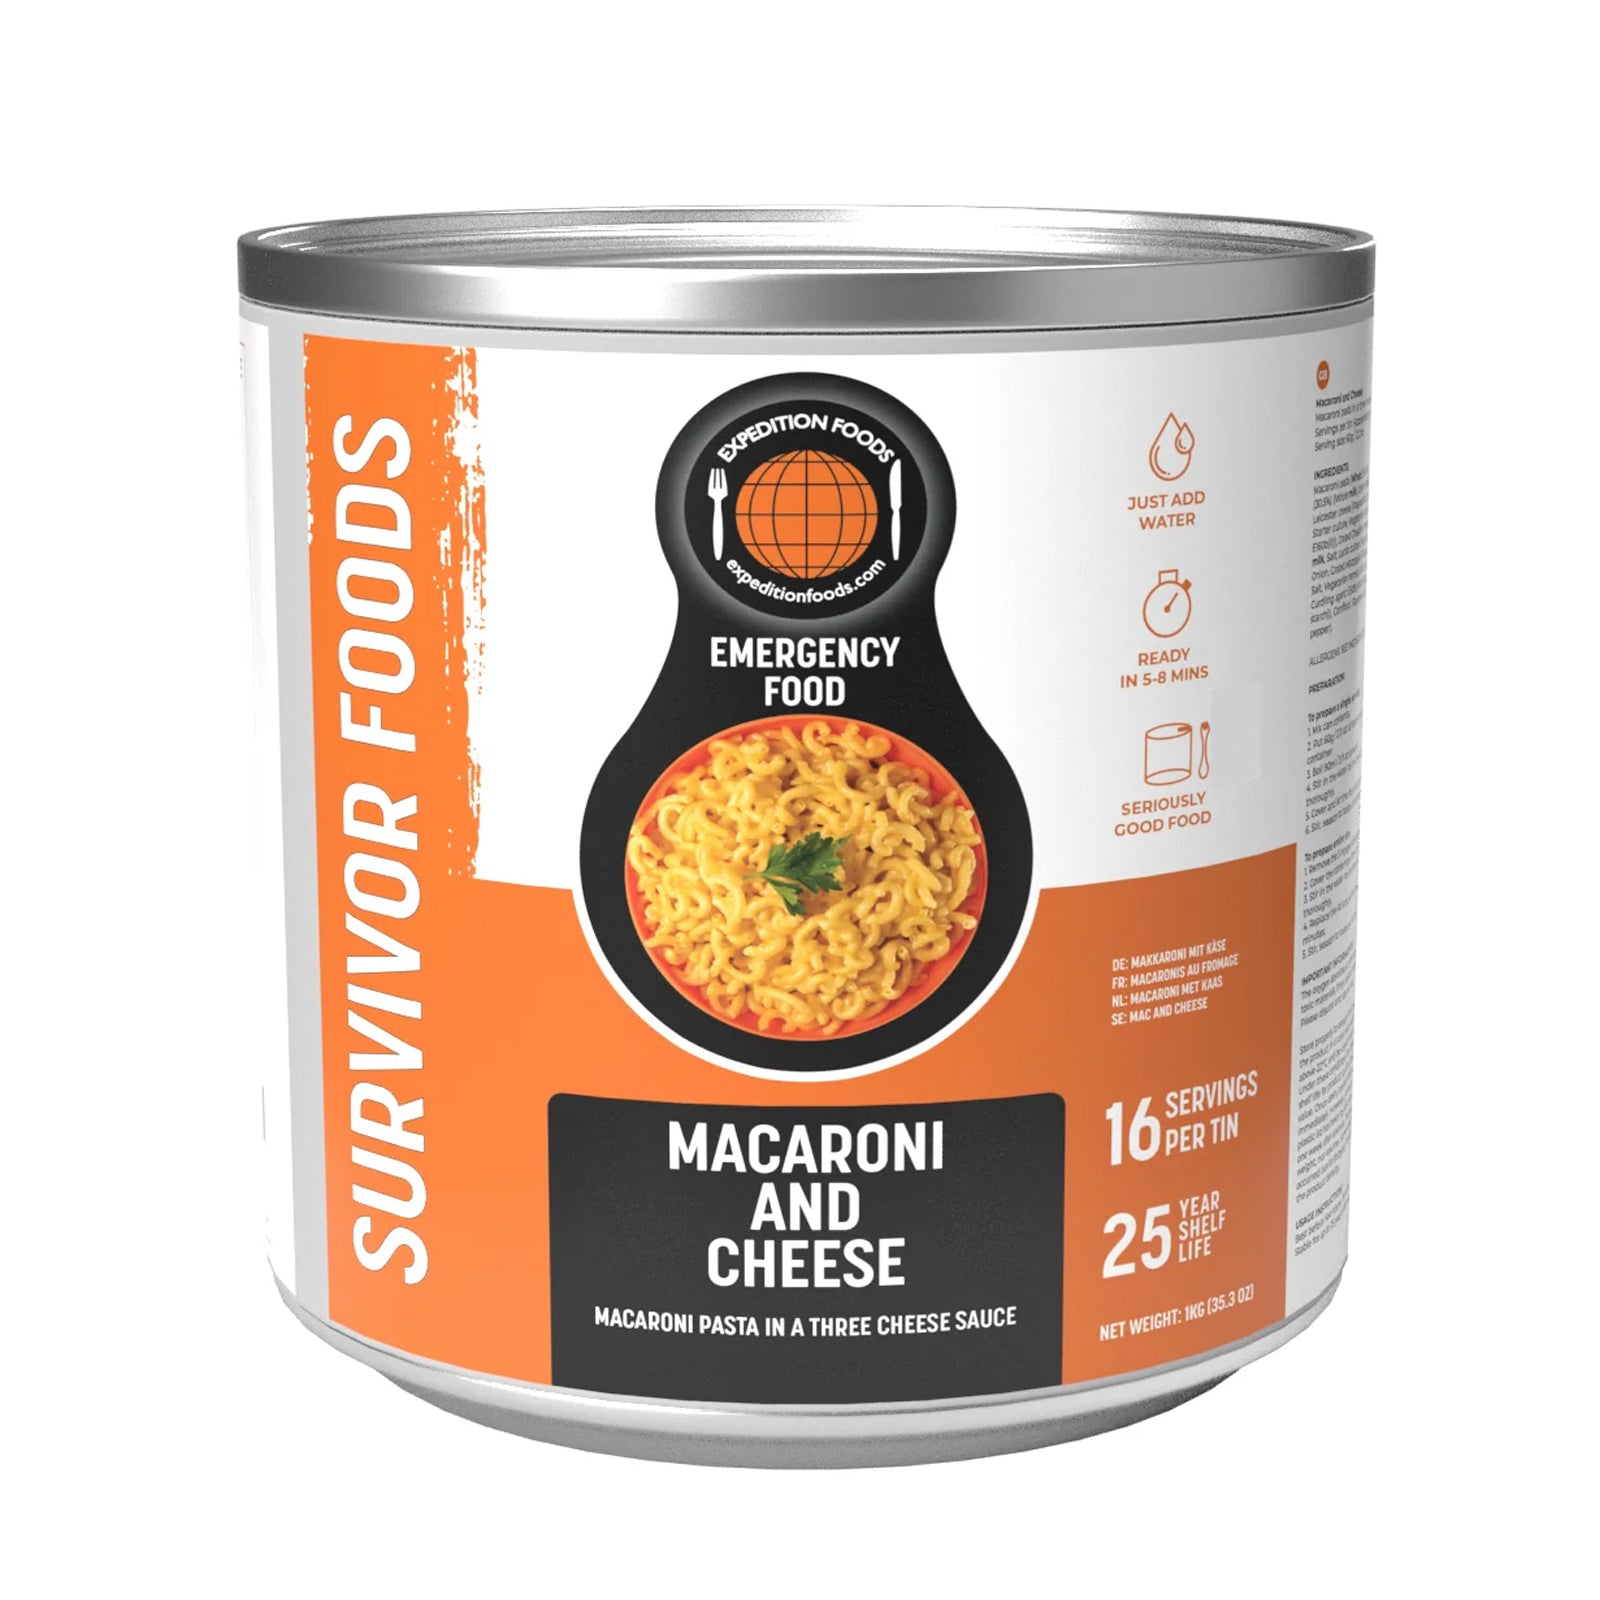 Expedition Foods Macaroni And Cheese Meal Tins